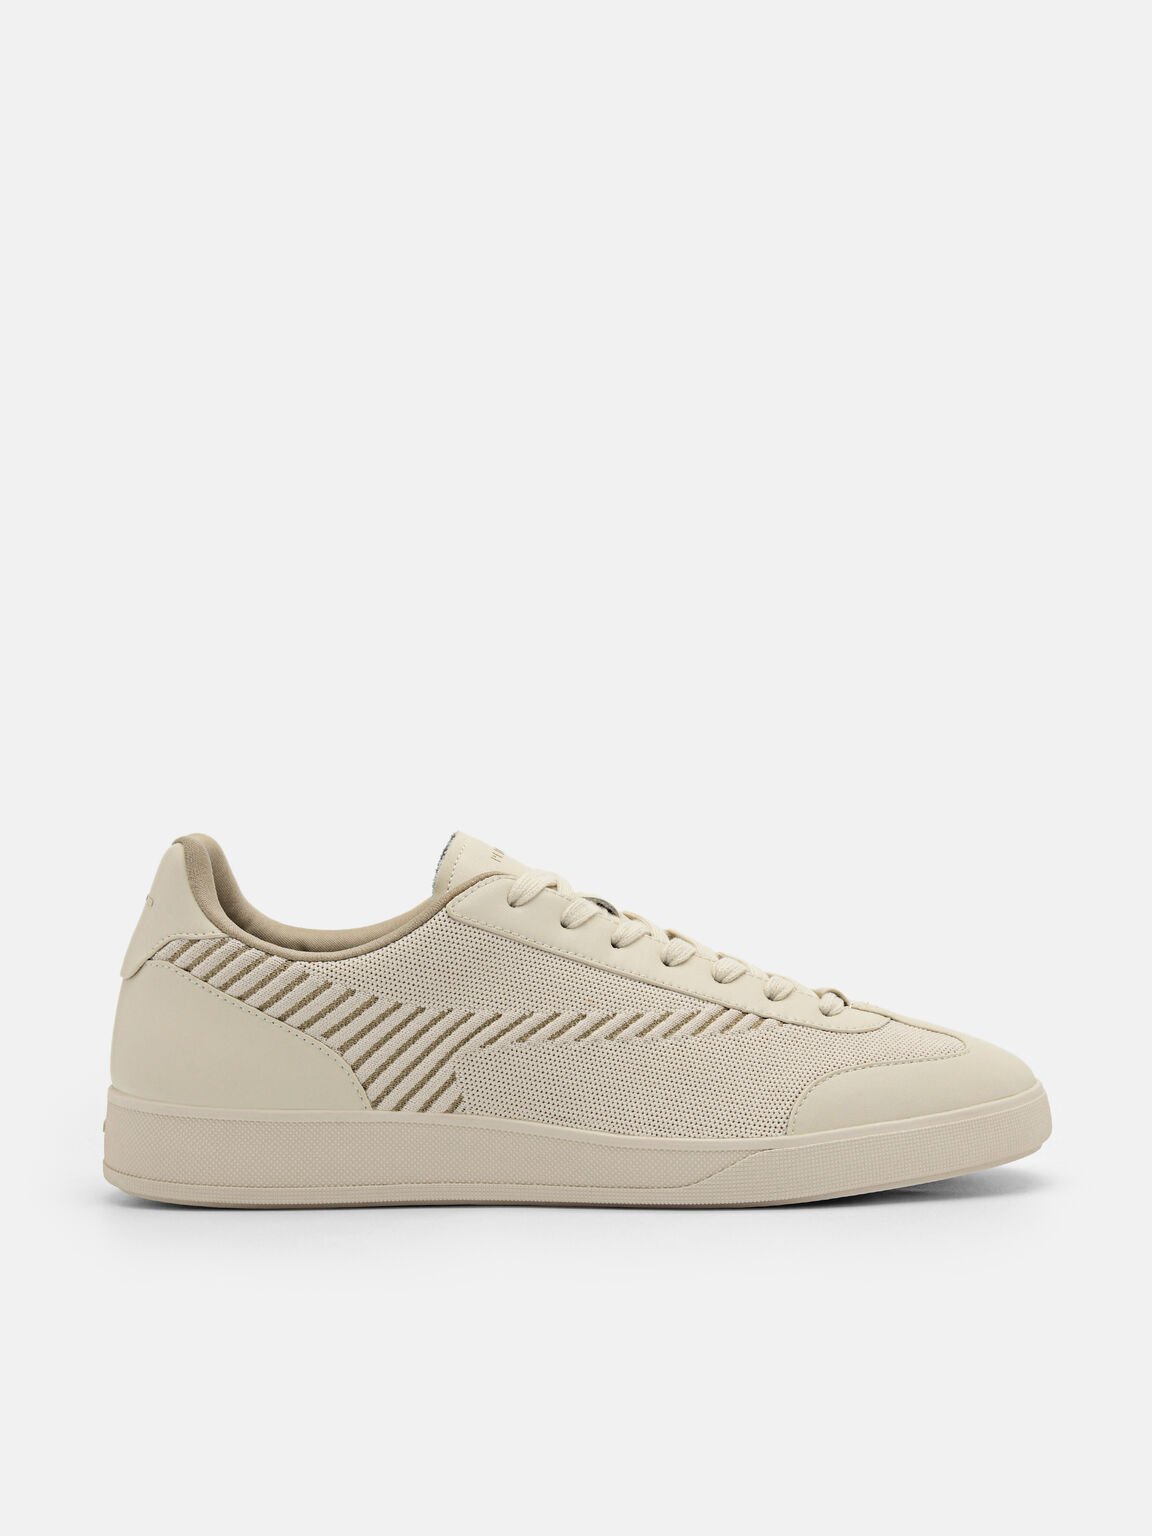 rePEDRO Knitted Sneakers, Sand, hi-res